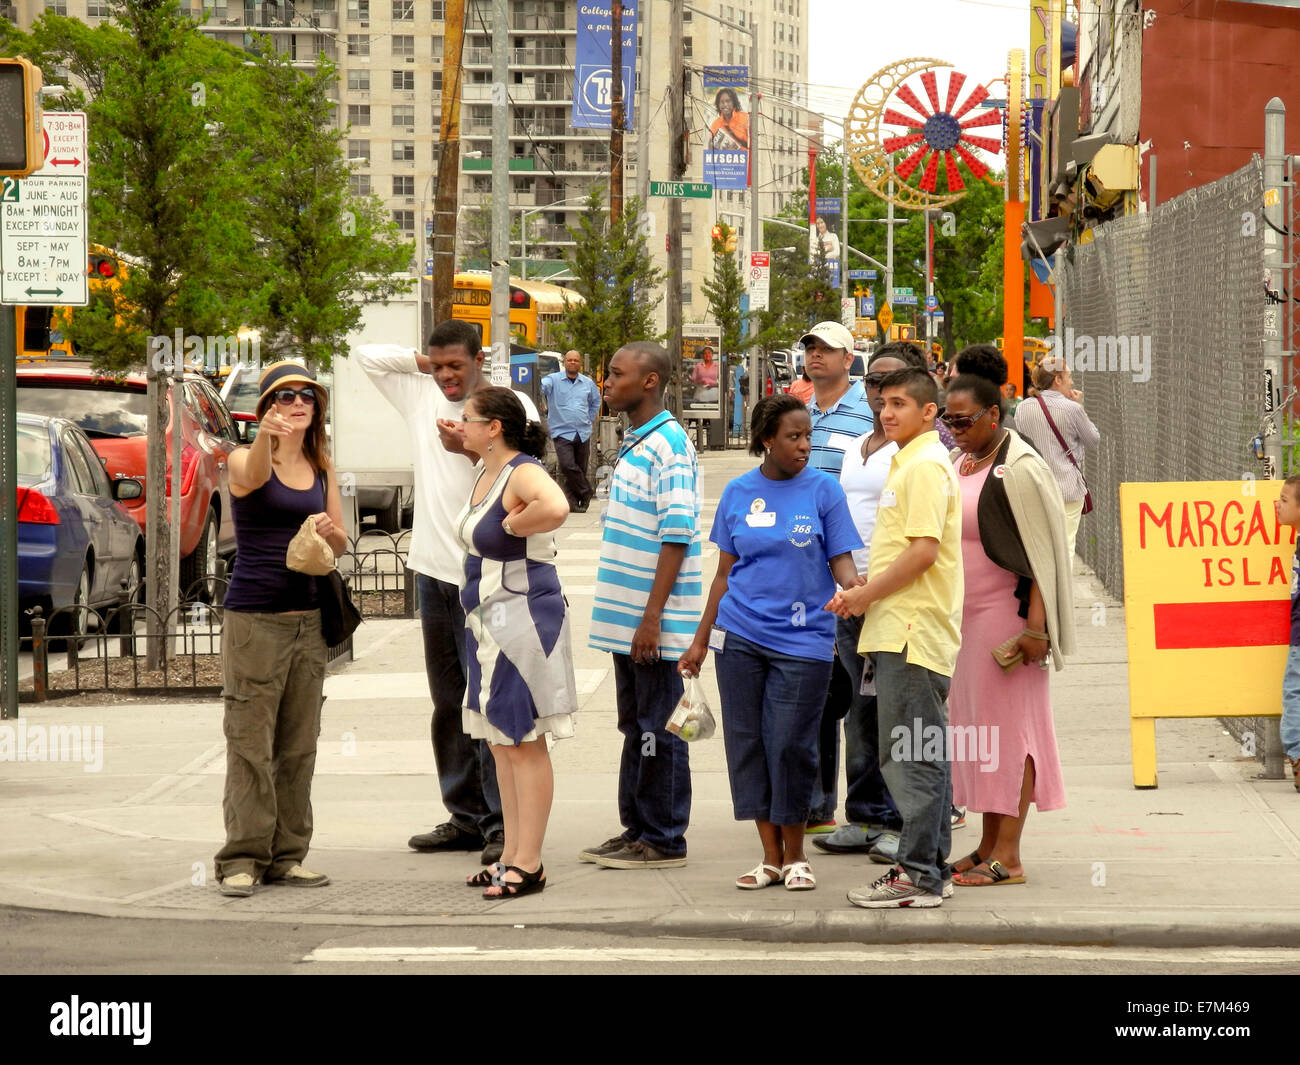 Local people wait to cross a street in Coney Island, New York City. Note, conversation, racial variety and amusement park signs. Stock Photo